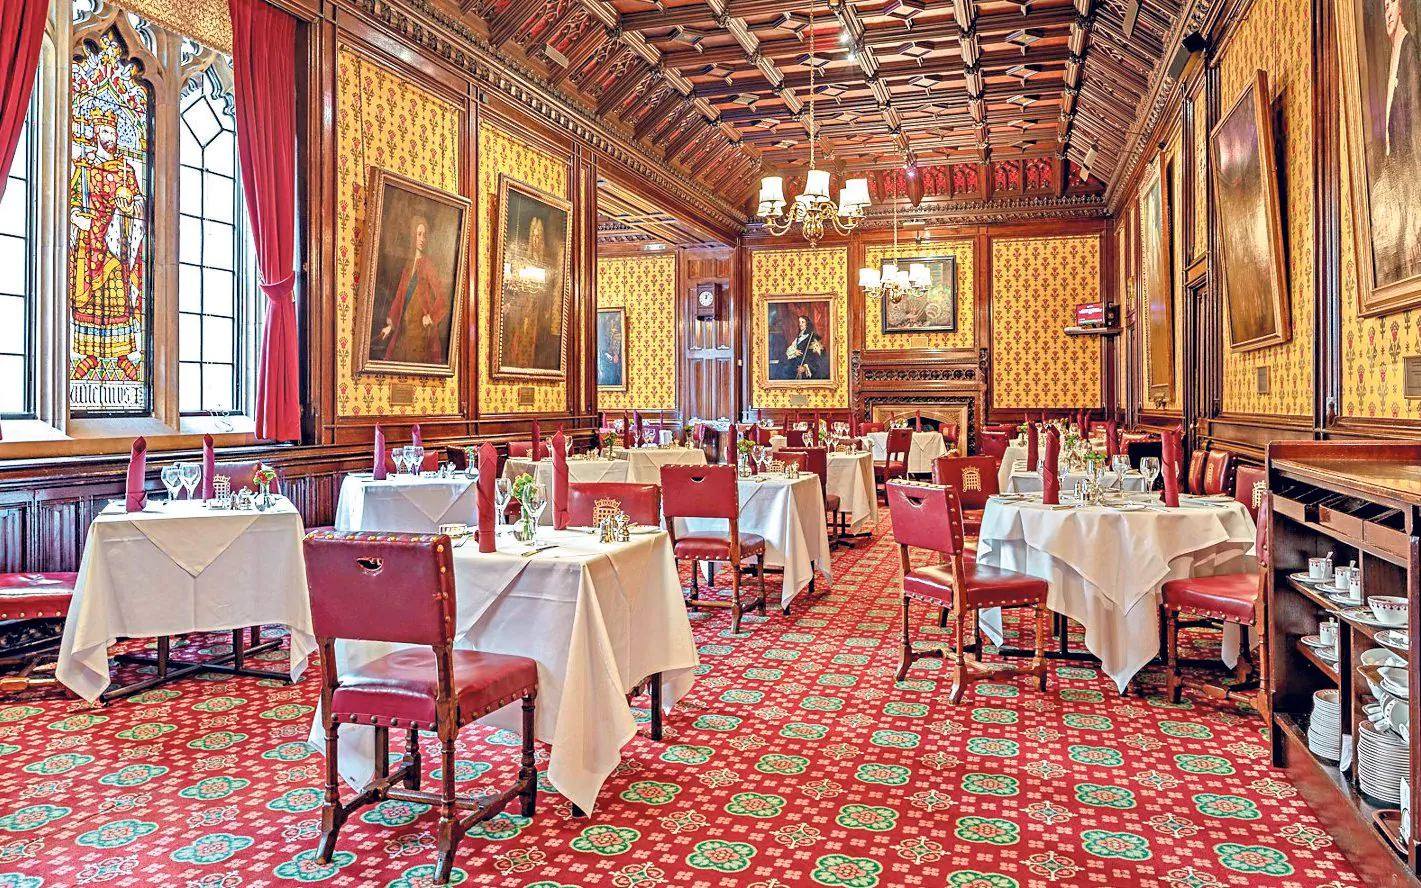 The House of Lords in Britain’s Houses of Parliament opens its Peers’ Dining Room to the public for a few days every year, and this writer enjoyed a very British three-course meal. Photo: Houses of Parliament Press Office